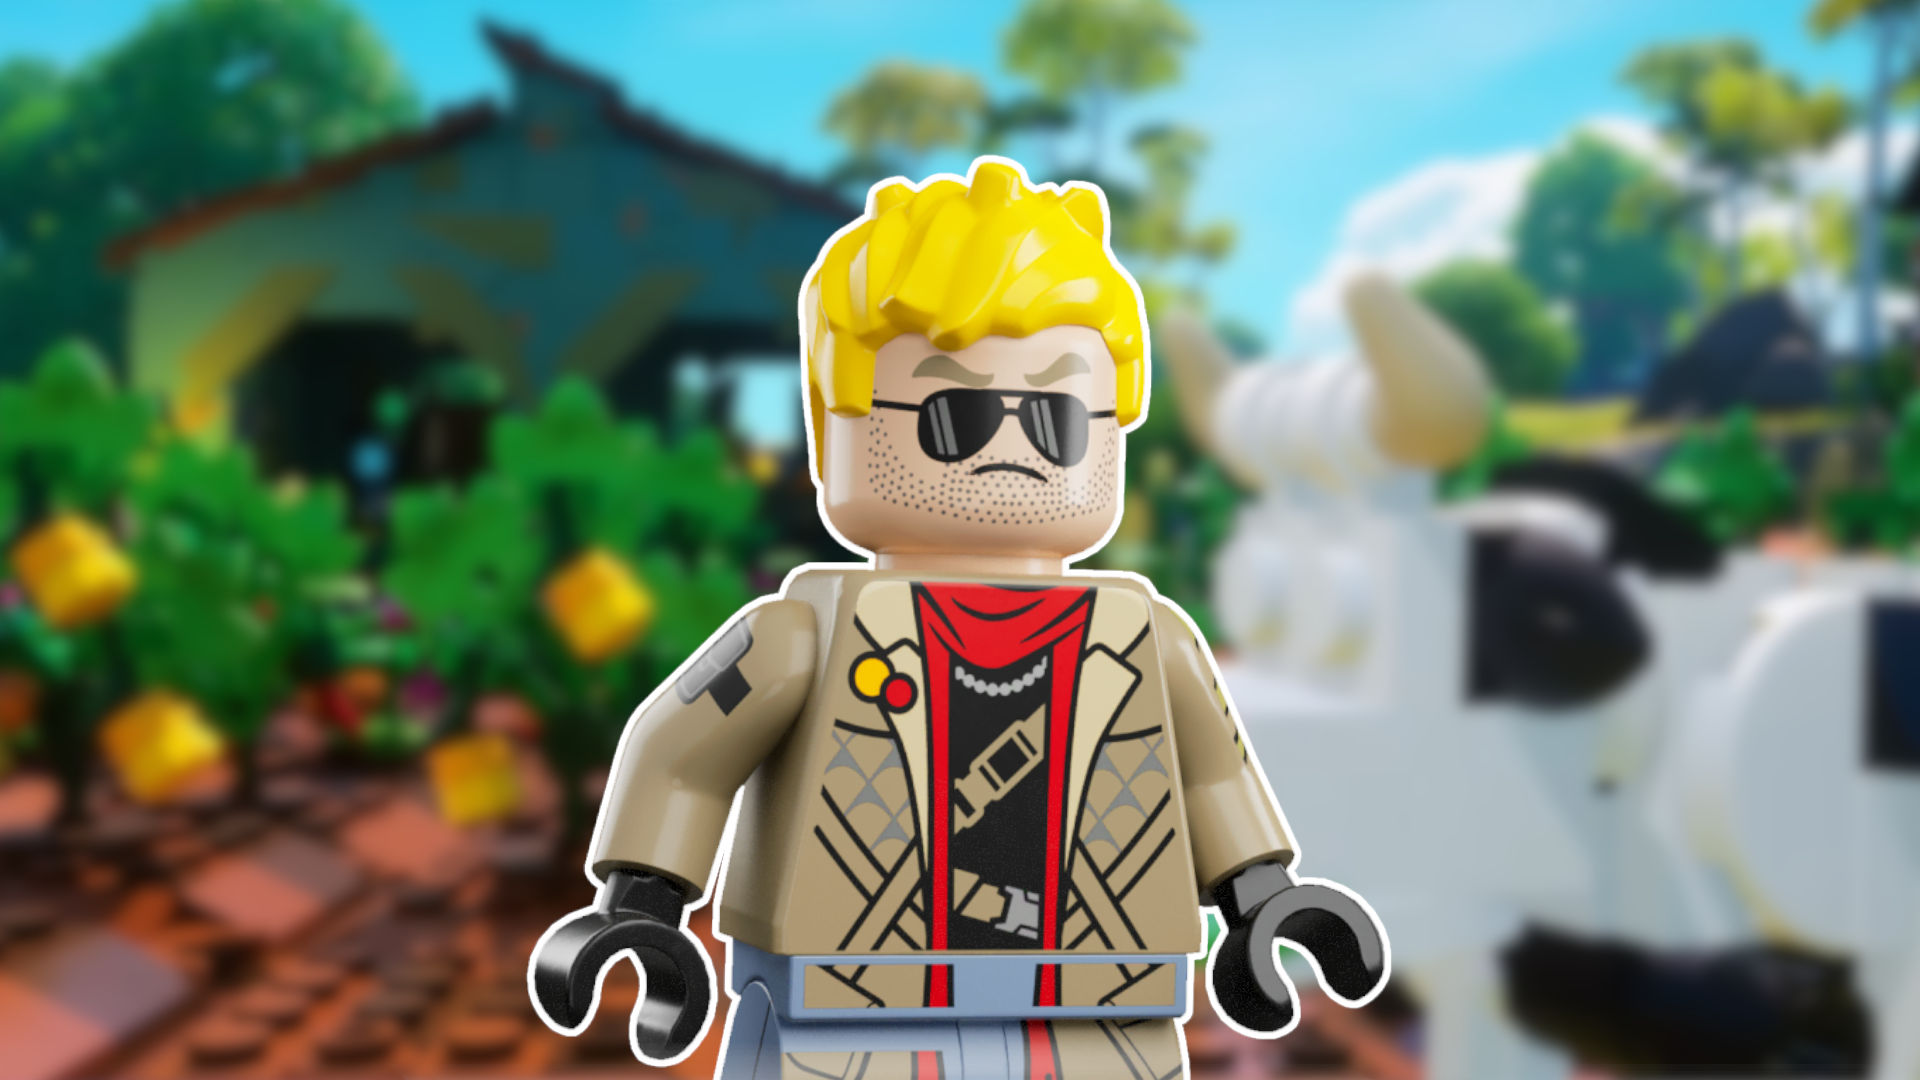 LEGO Roblox Avatar How To Build Tutorial *VERY EASY 